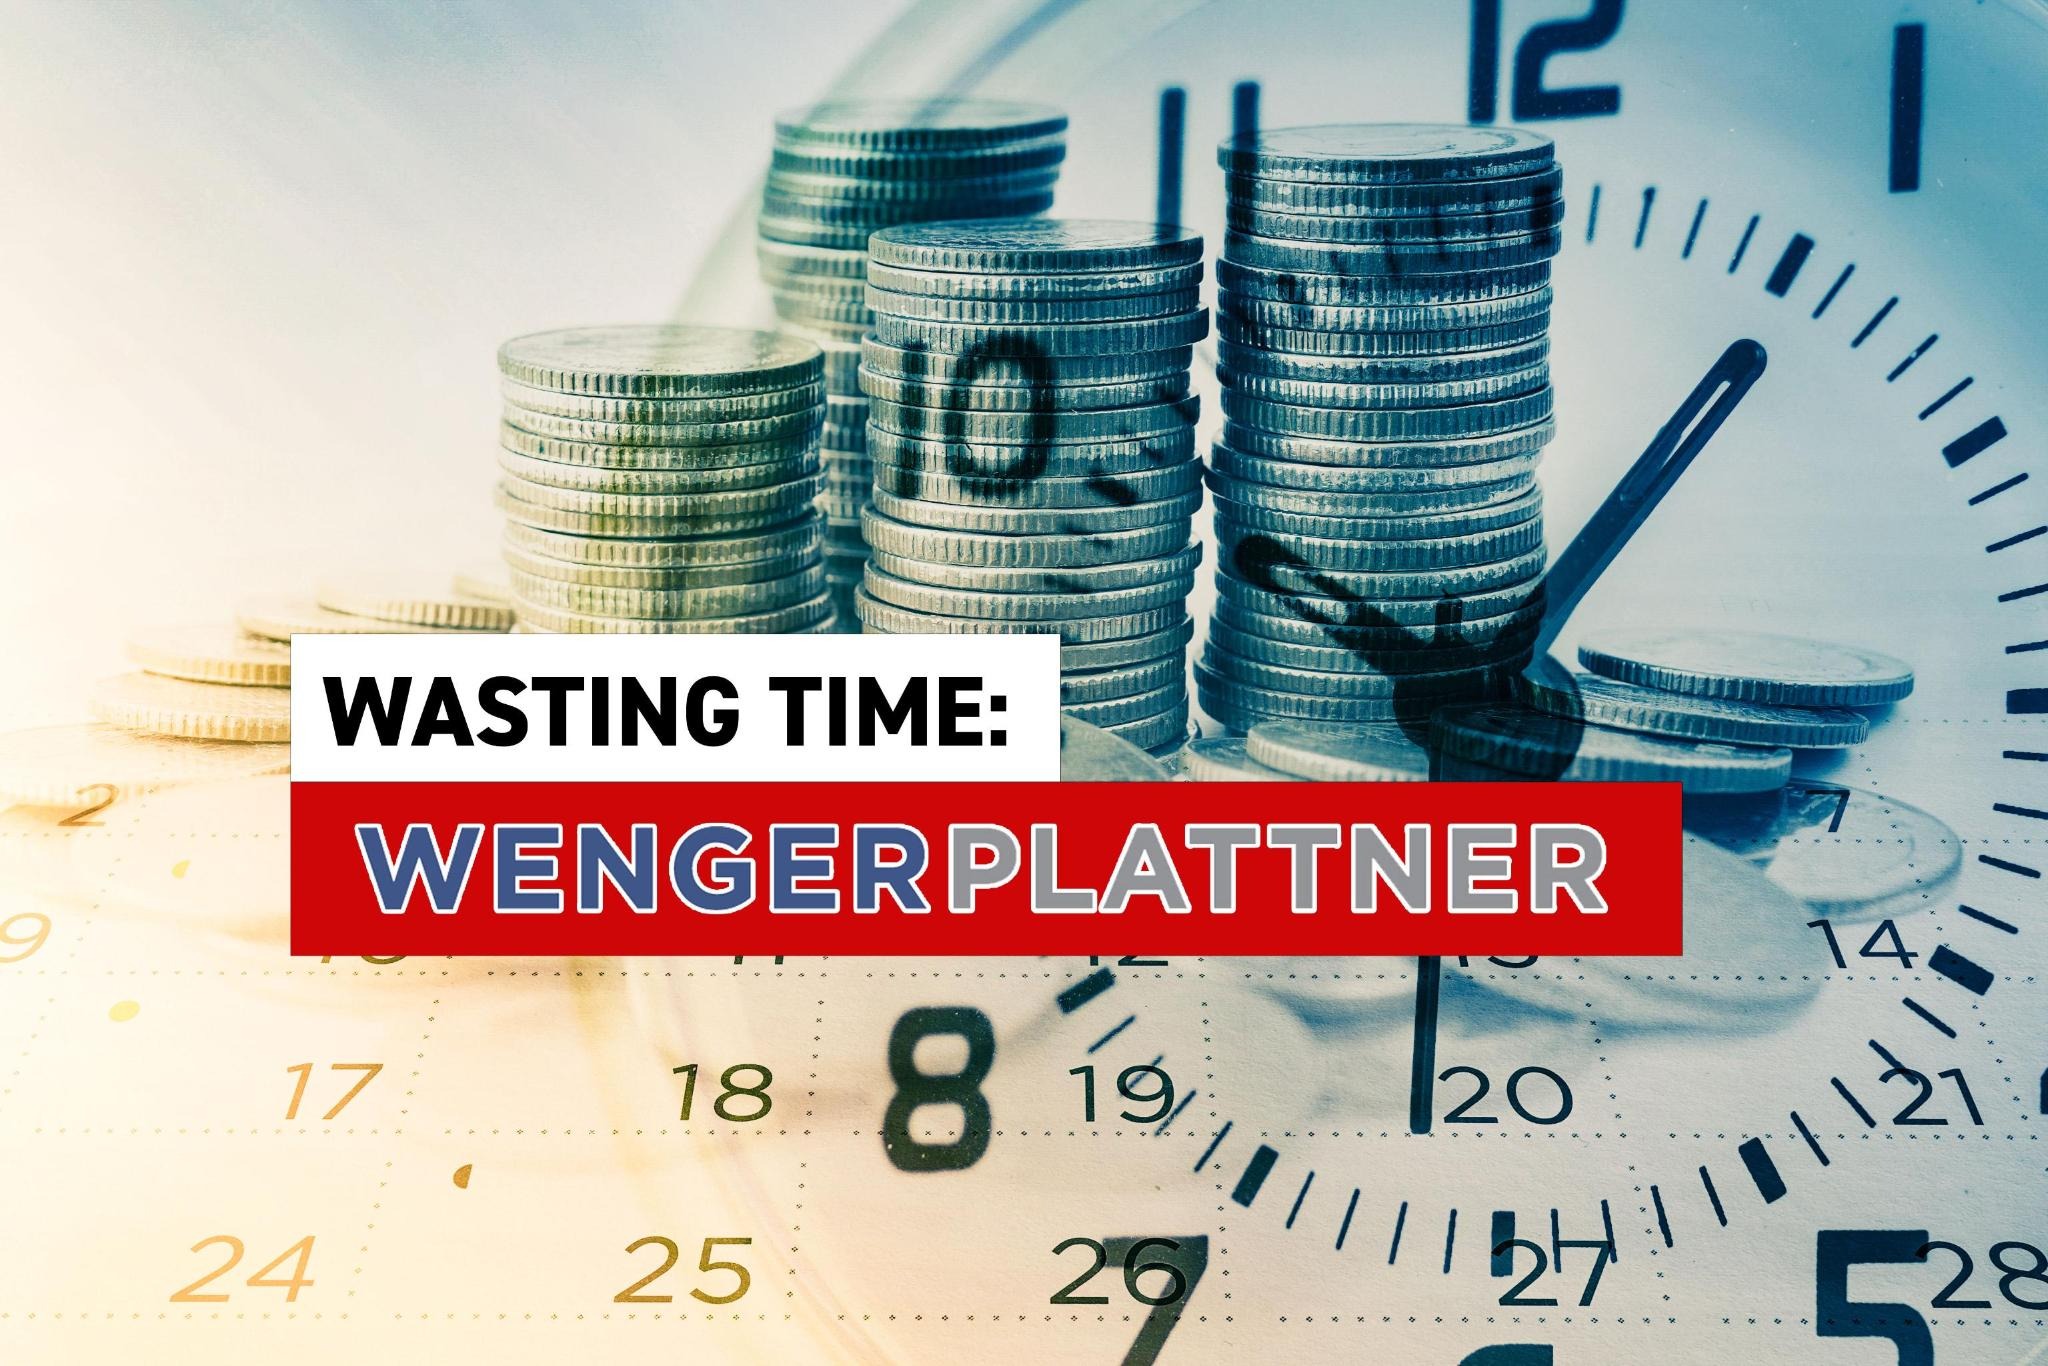 Wenger Plattner Stalls Envion Liquidation & Collects Millions In Fees, Creditors Left Waiting 5 Years After ICO